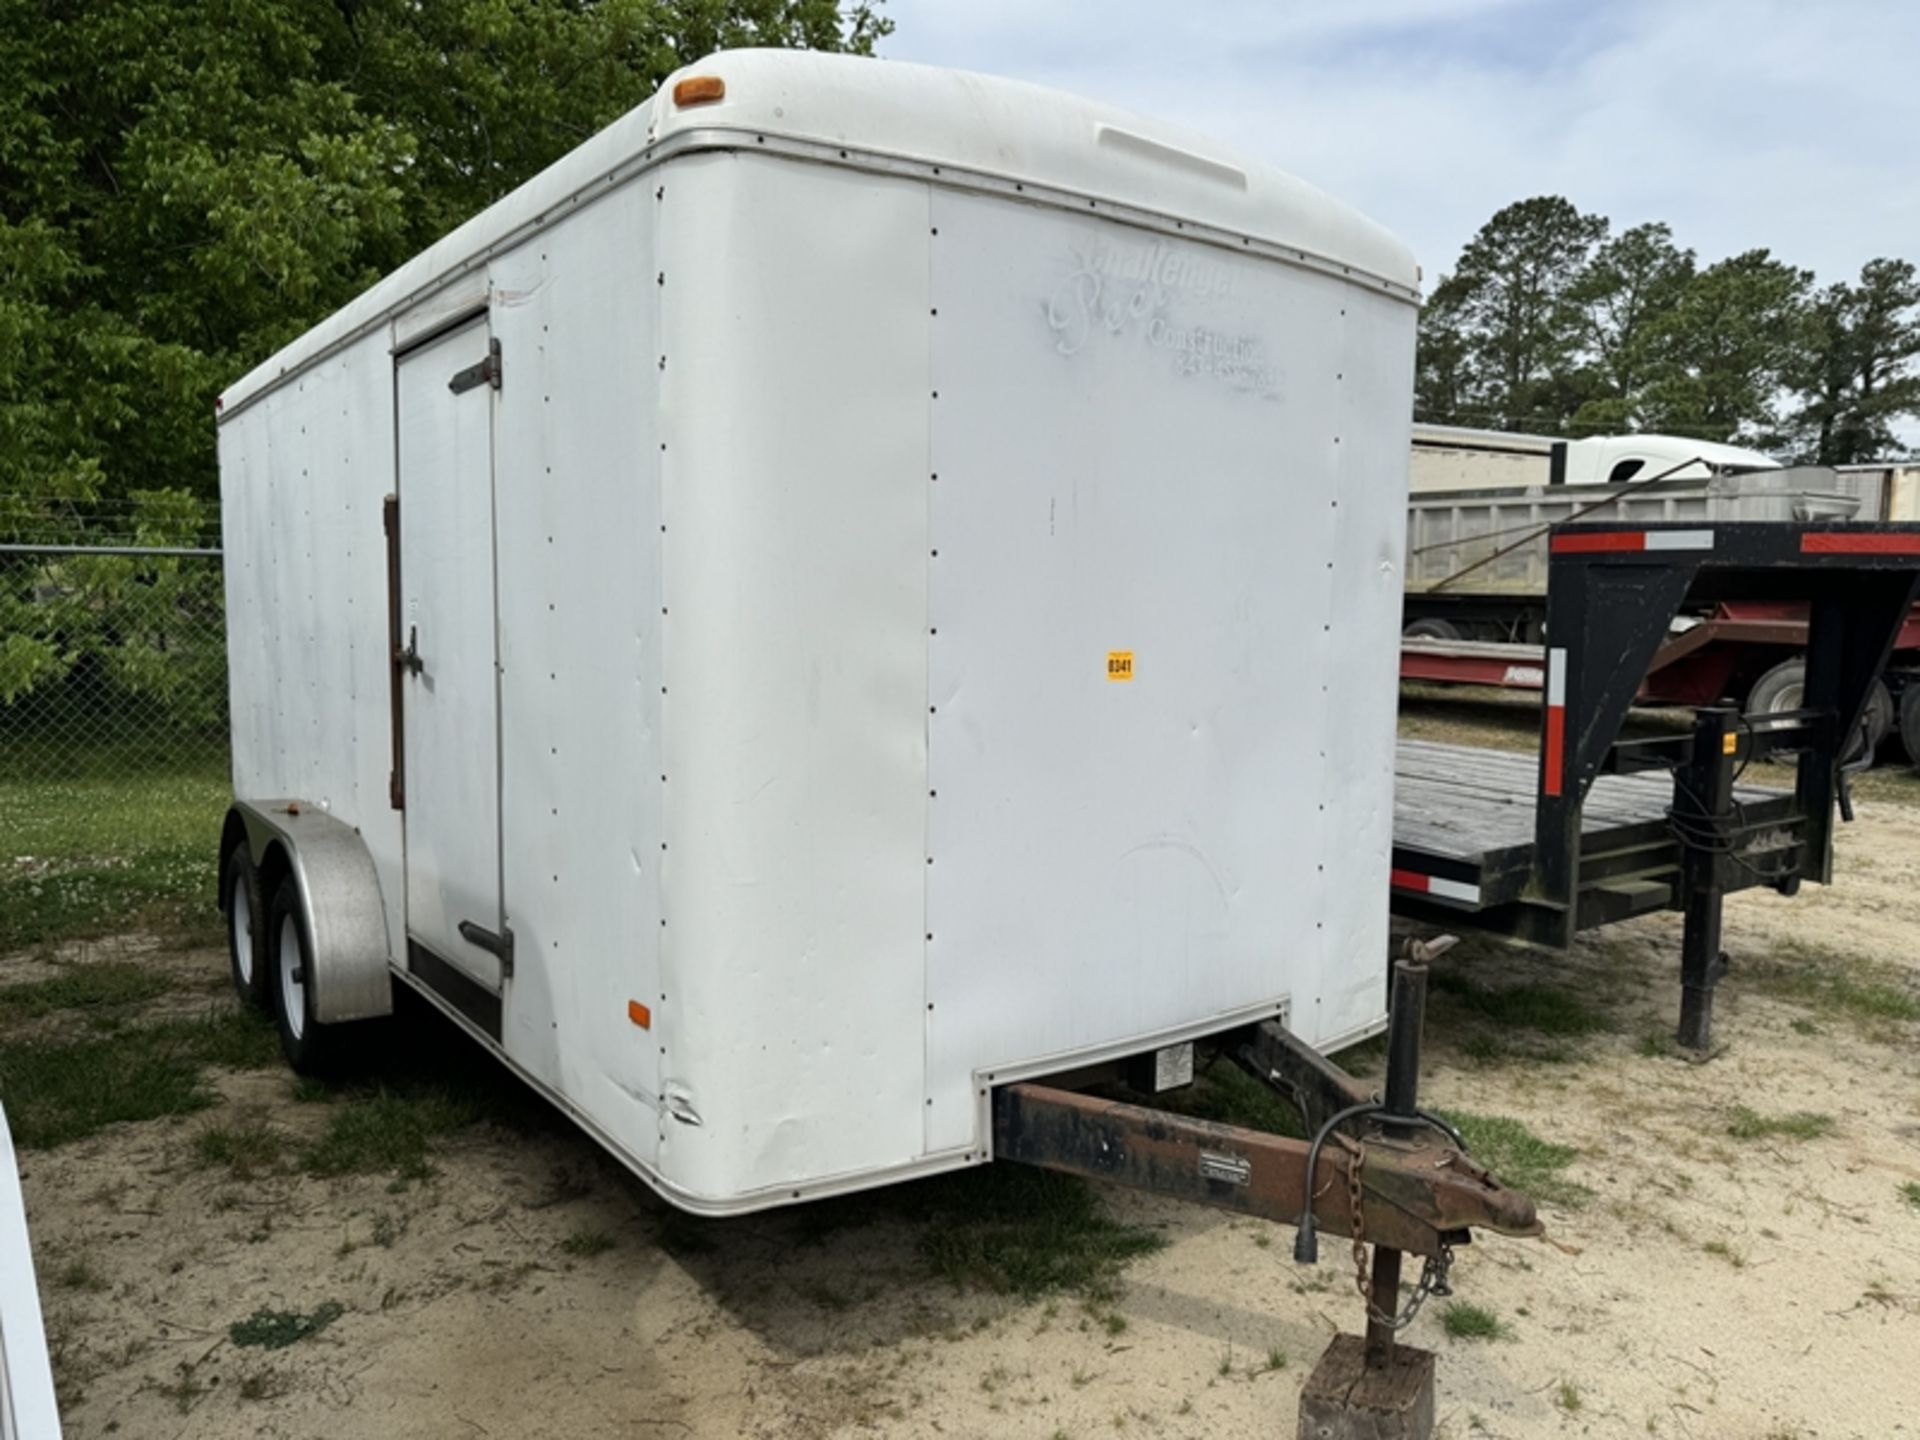 2001 HOMESTEADER 16' dual-axle enclosed trailer with barn doors and side door - 5HABA162111014686 - Image 2 of 5